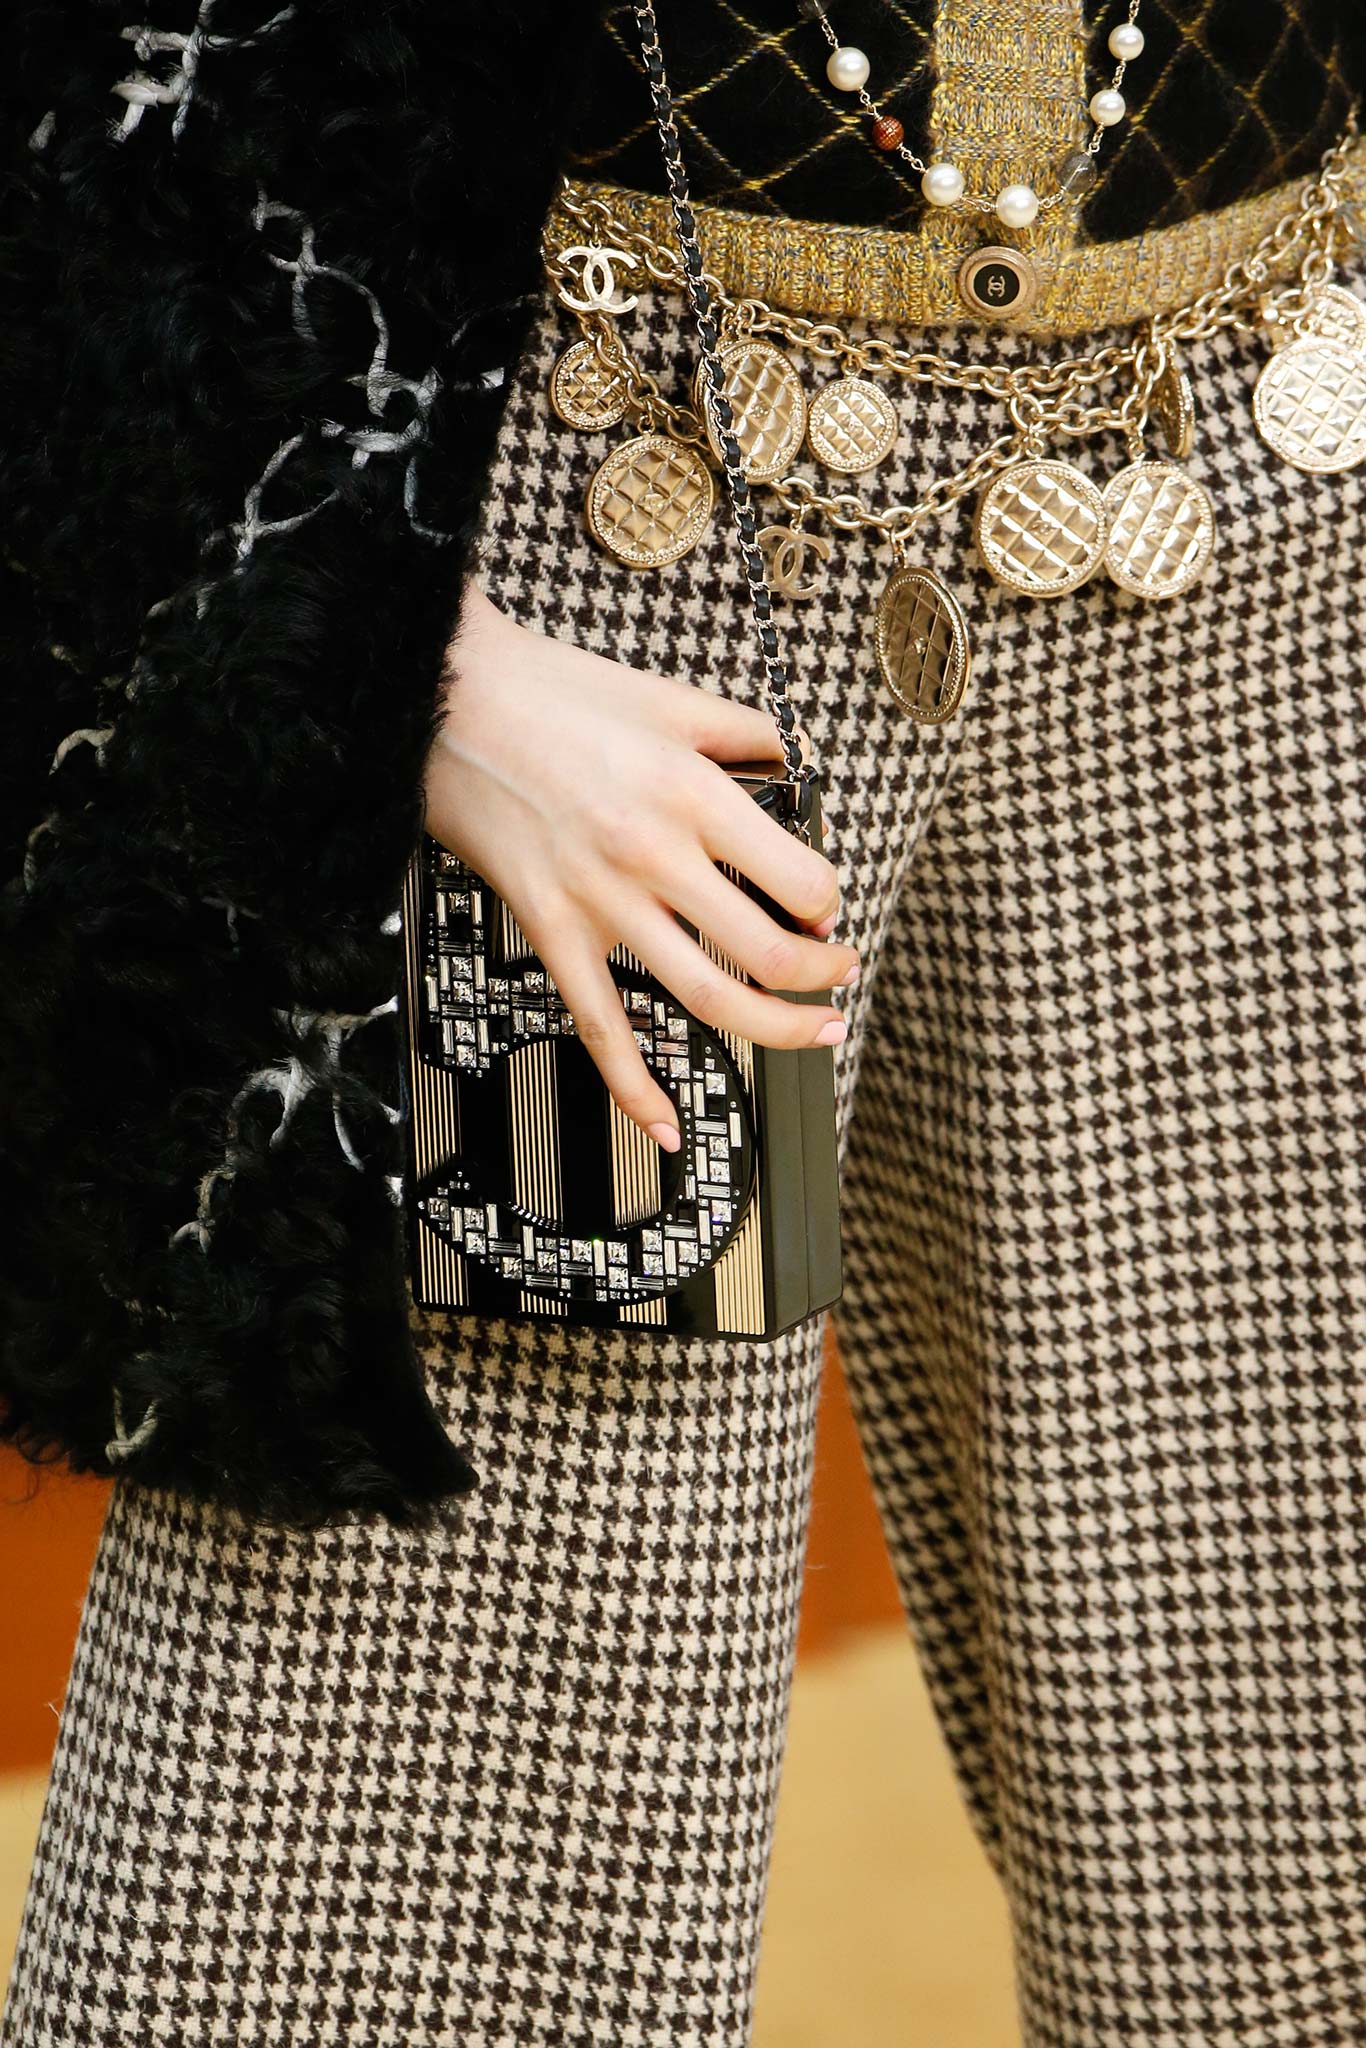 Chanel Fall/Winter 2015 Runway Bag Collection featuring the Brasserie ...